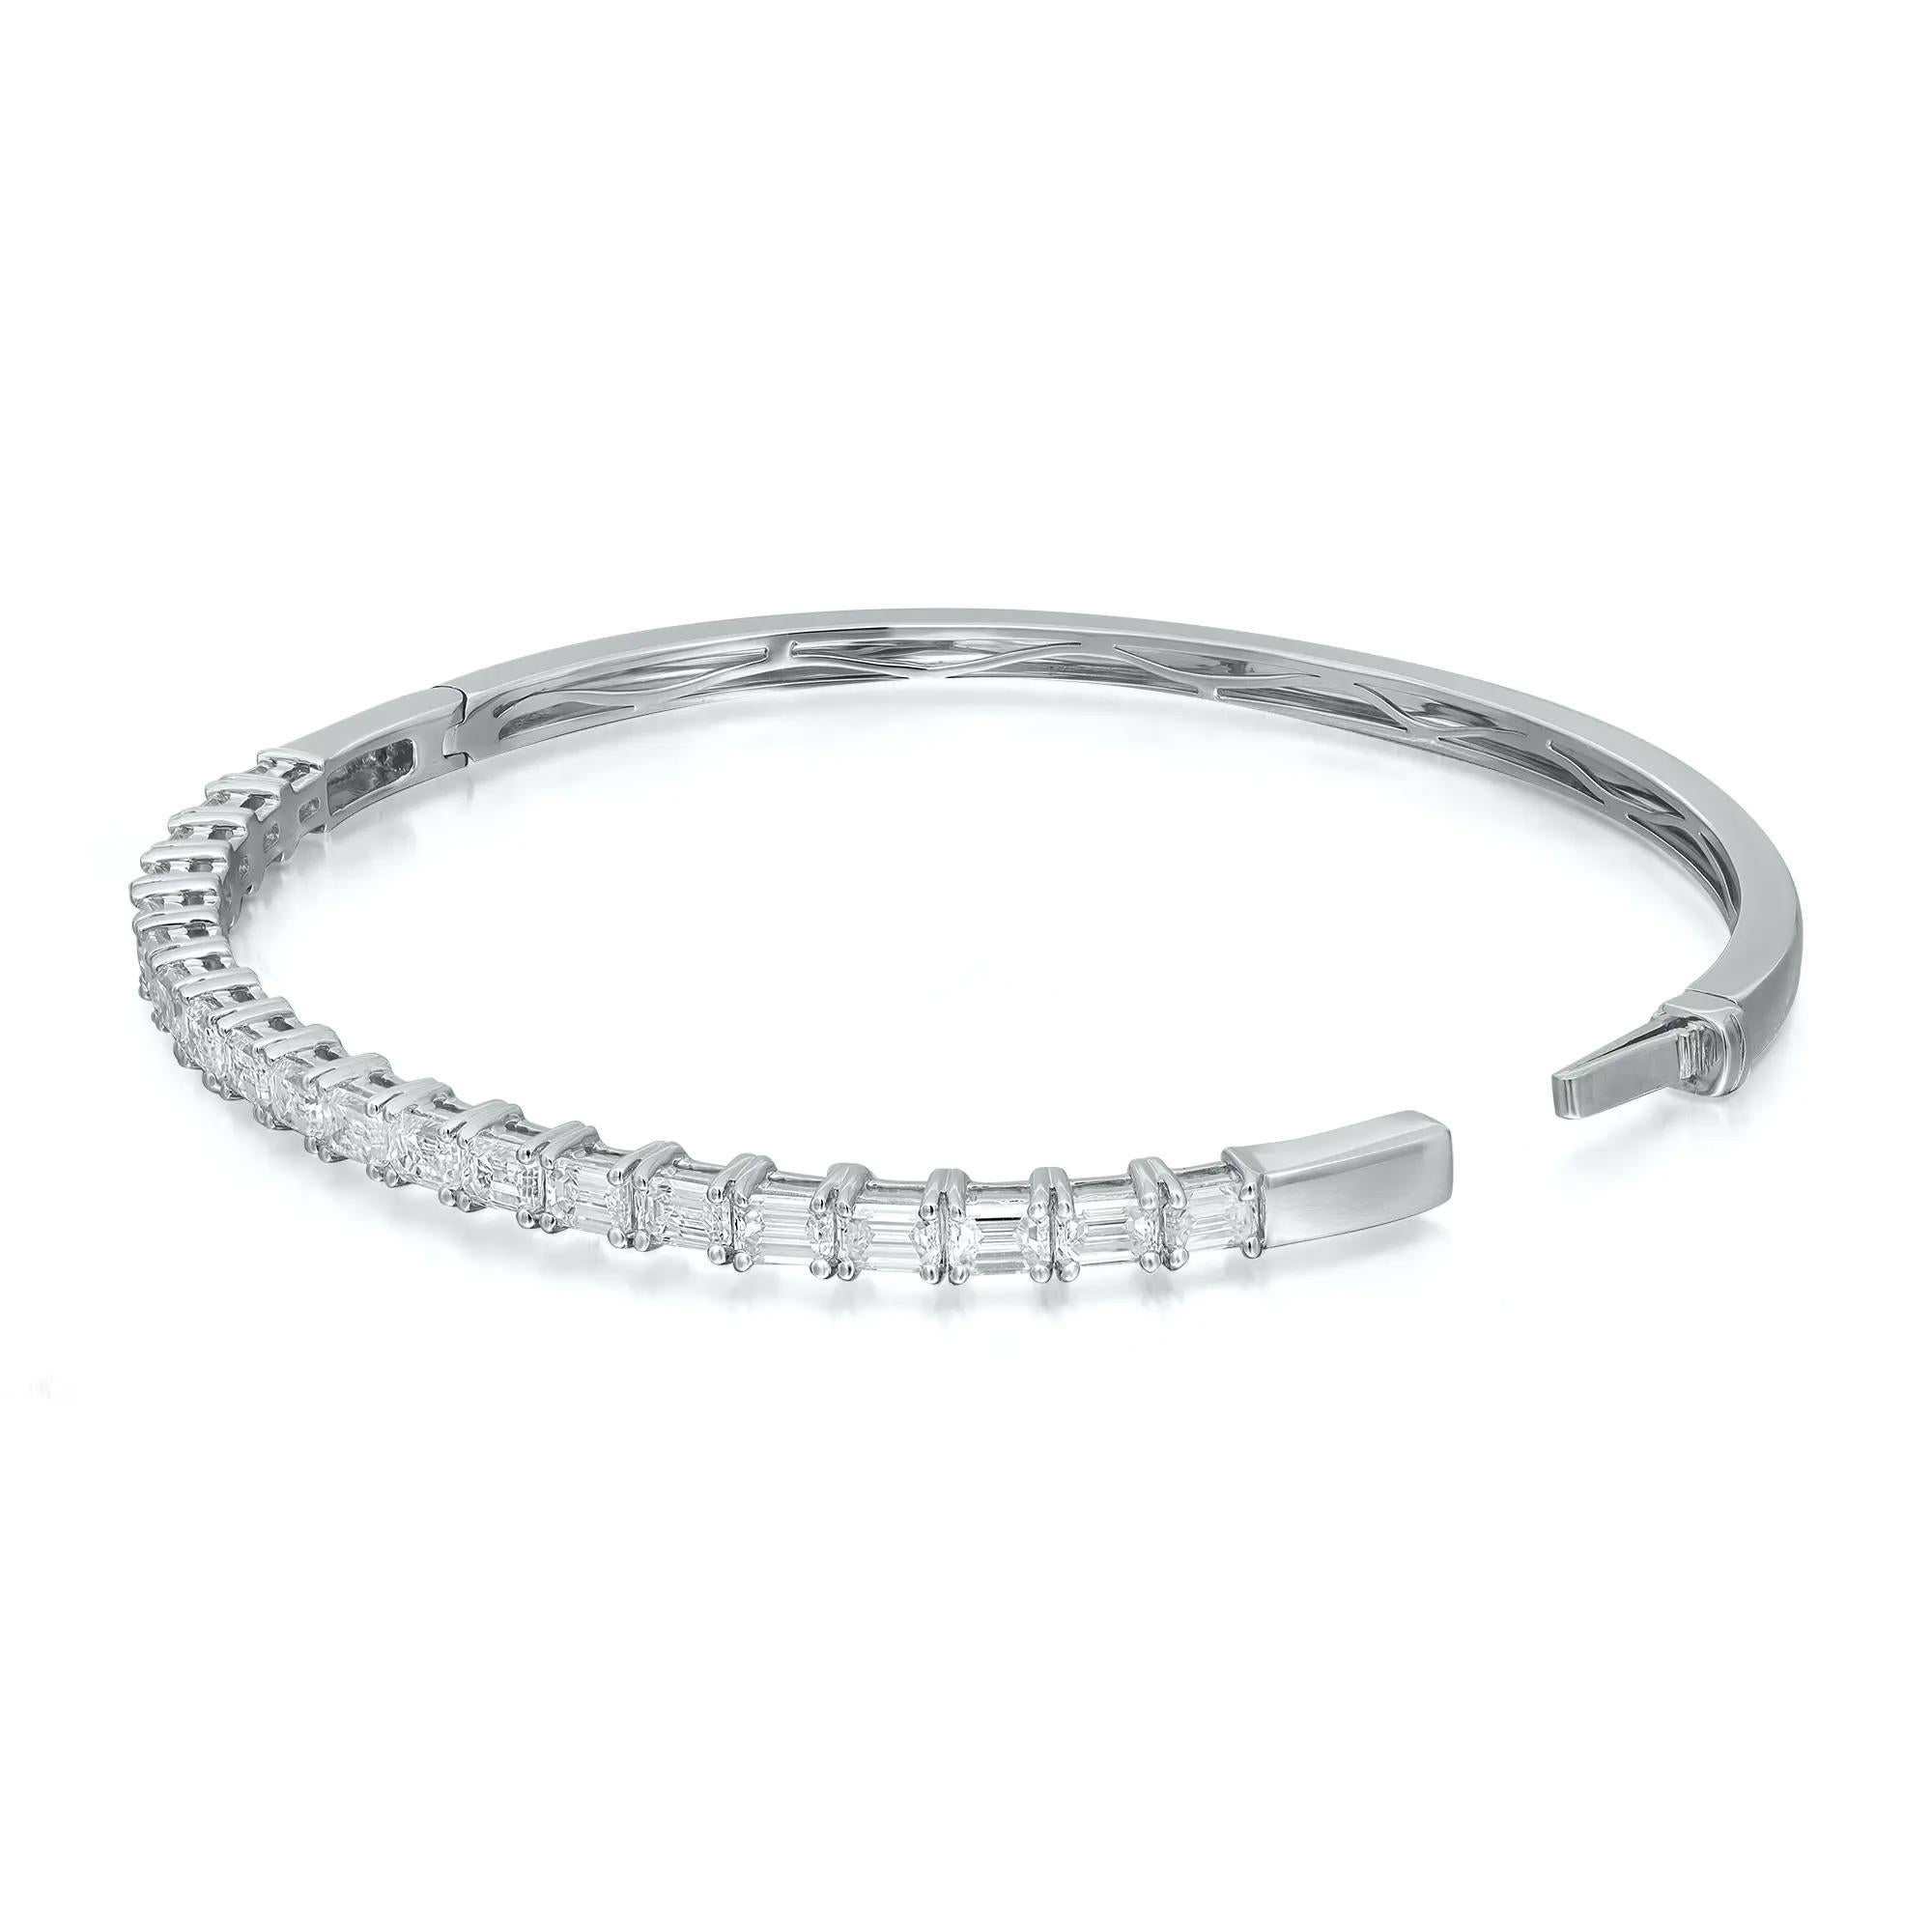 Experience the epitome of sophistication with our 2.77 Carat Emerald Cut Diamond Bangle Bracelet in 18K White Gold, meticulously crafted with a touch of brilliance. The stunning emerald-cut diamond, boasting 2.77 carats of pure elegance, is